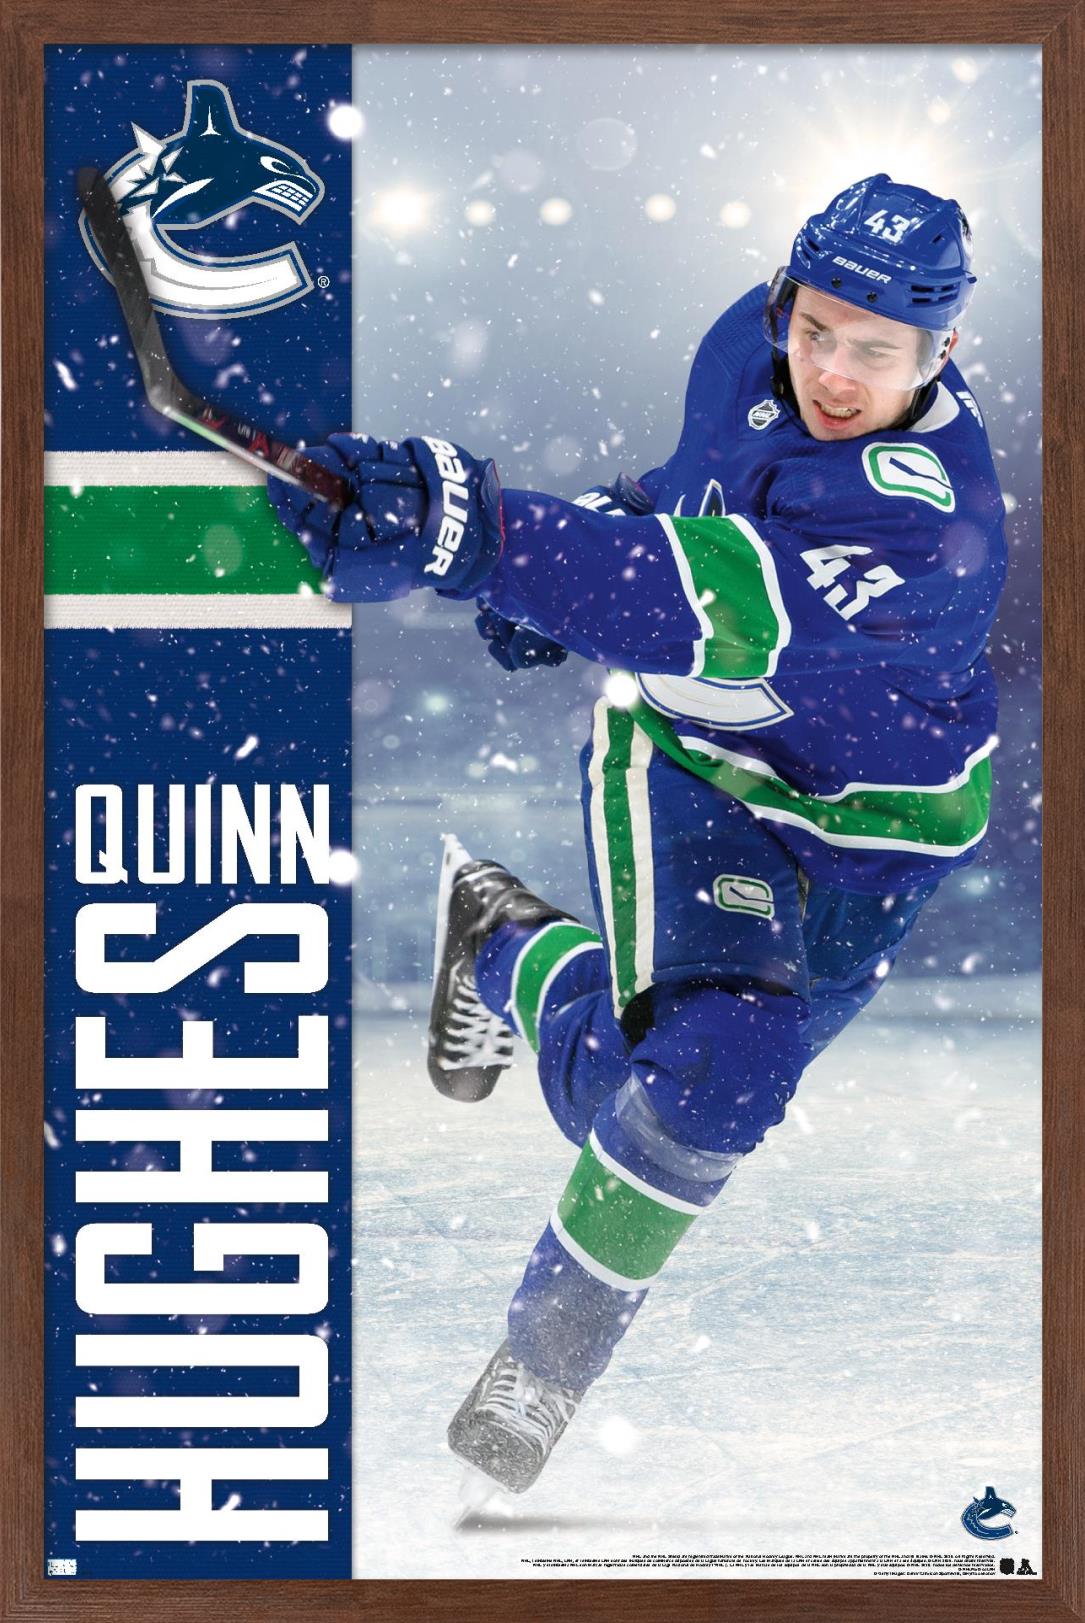 NHL Vancouver Canucks - Quinn Hughes 20 Wall Poster, 14.725" x 22.375", Framed - image 1 of 5